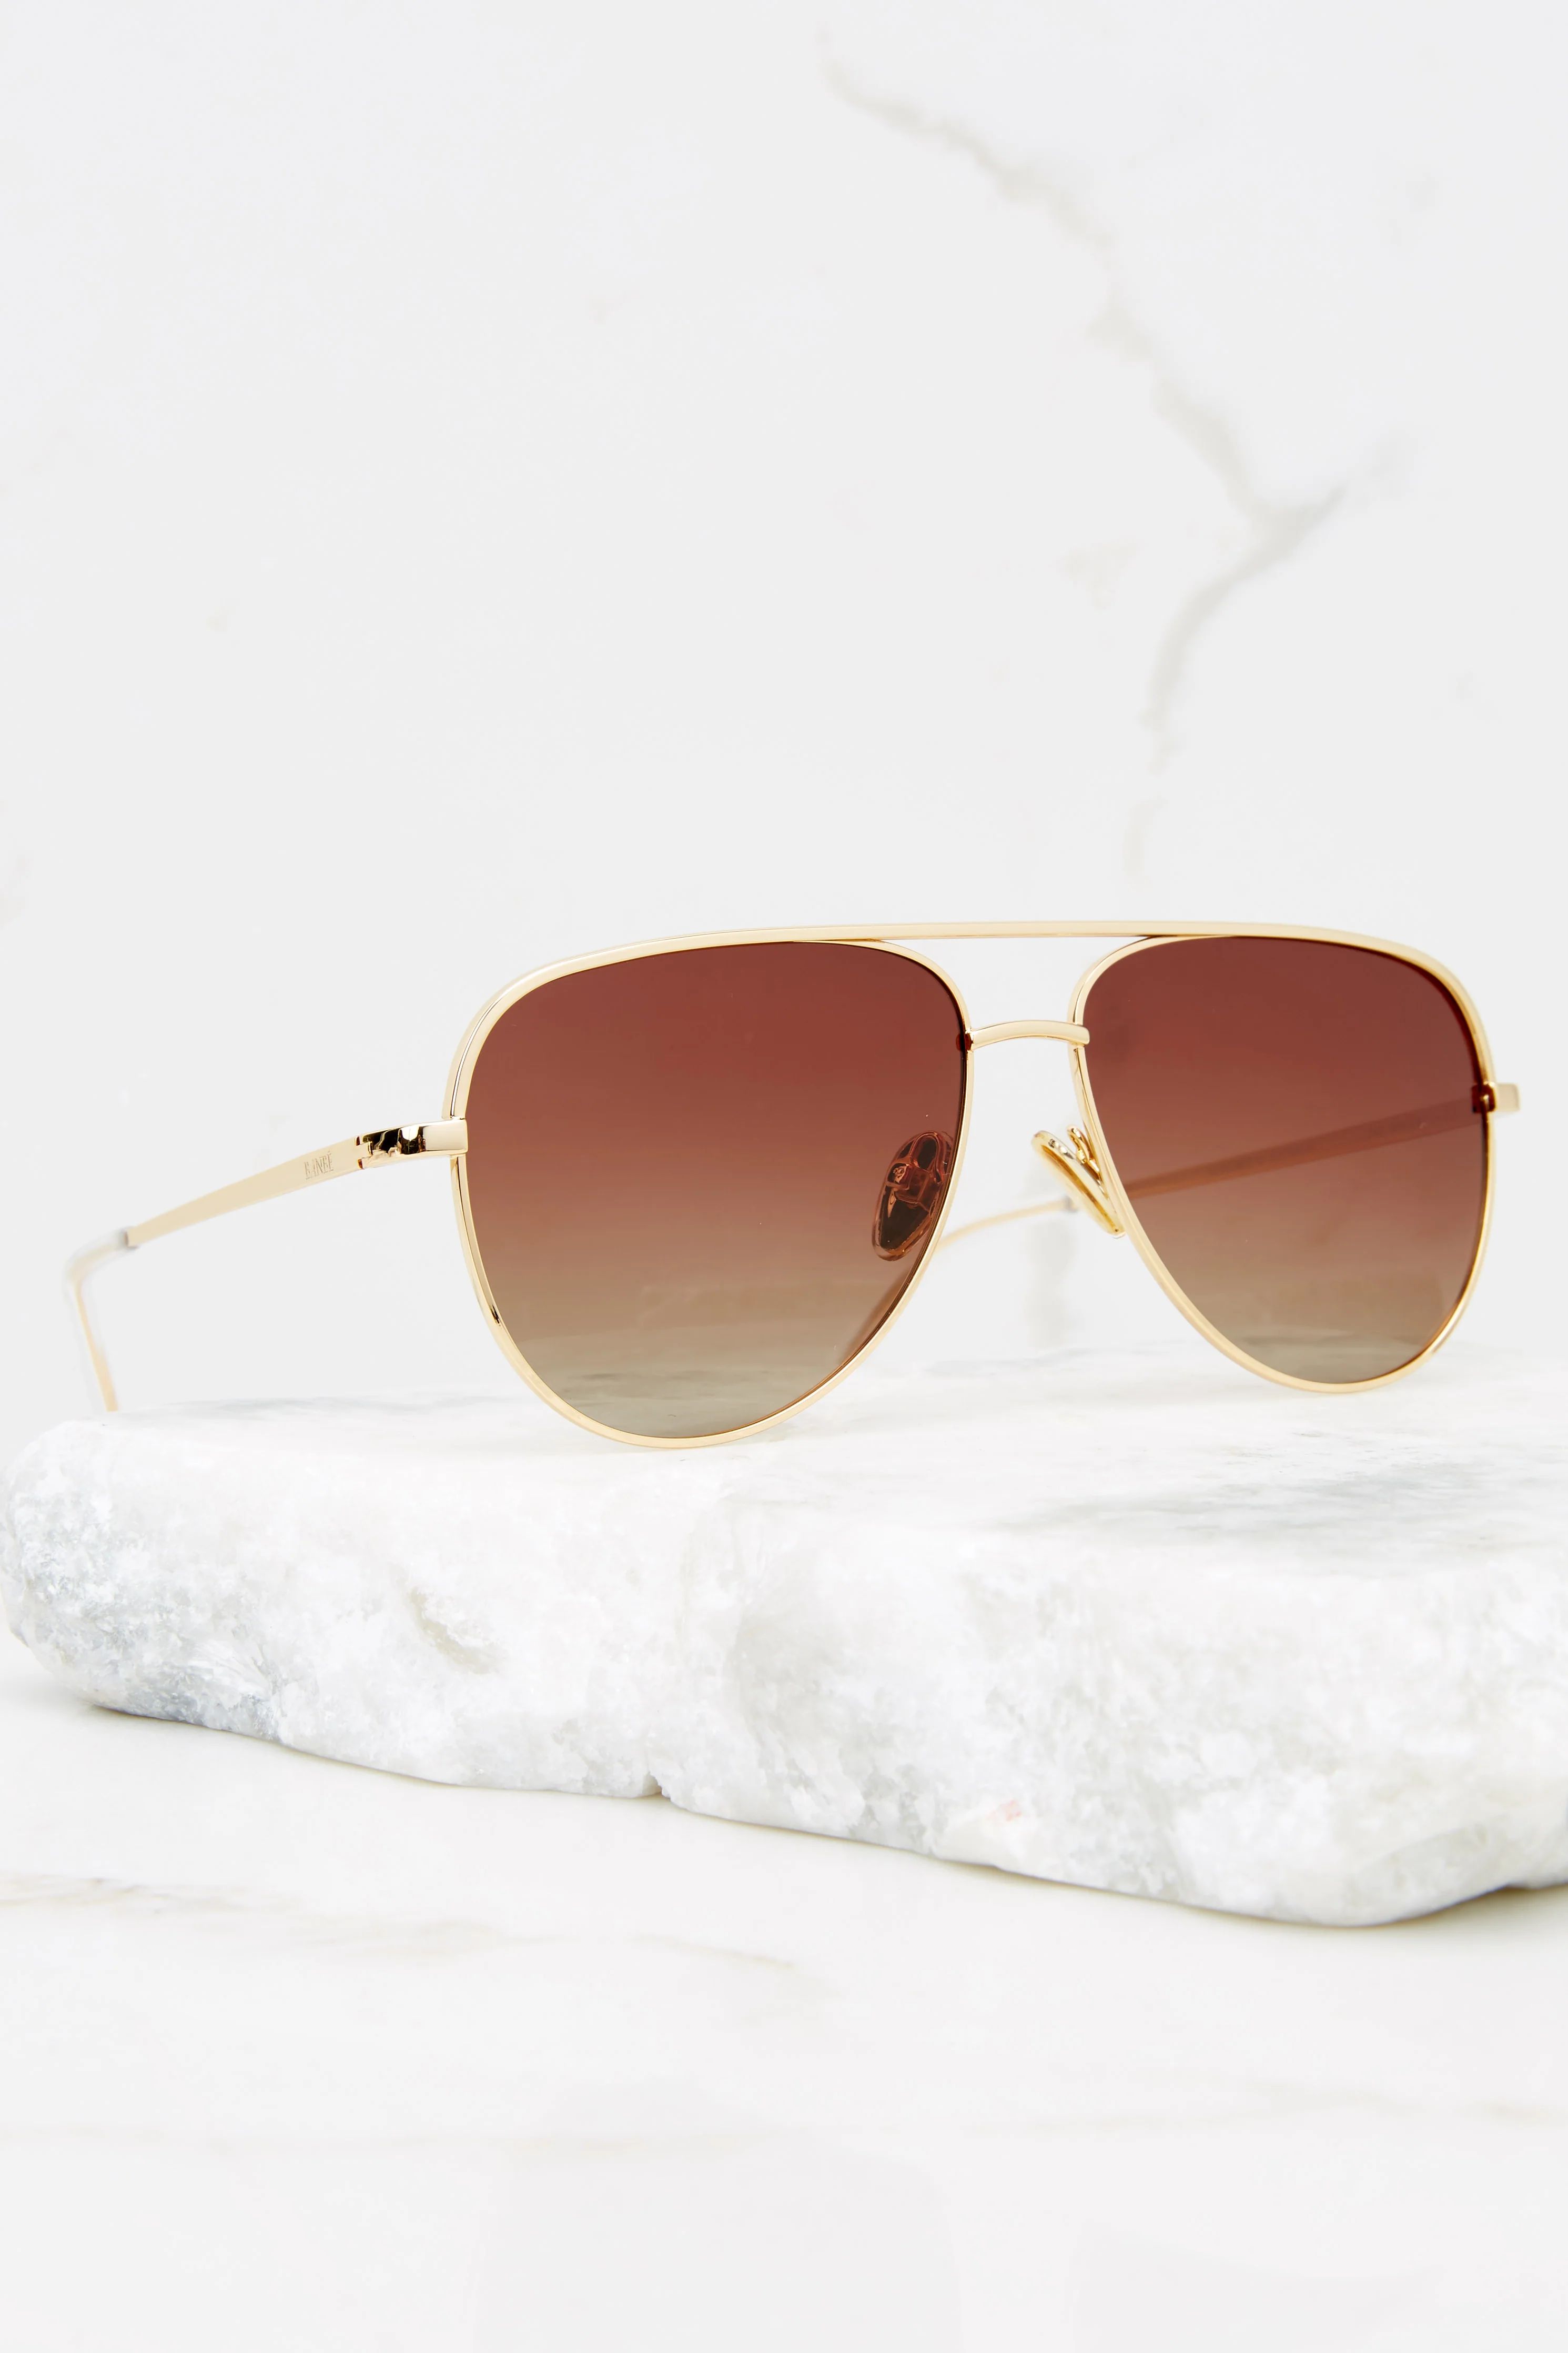 Taylor Gold Brown Fade Sunglasses | Red Dress 